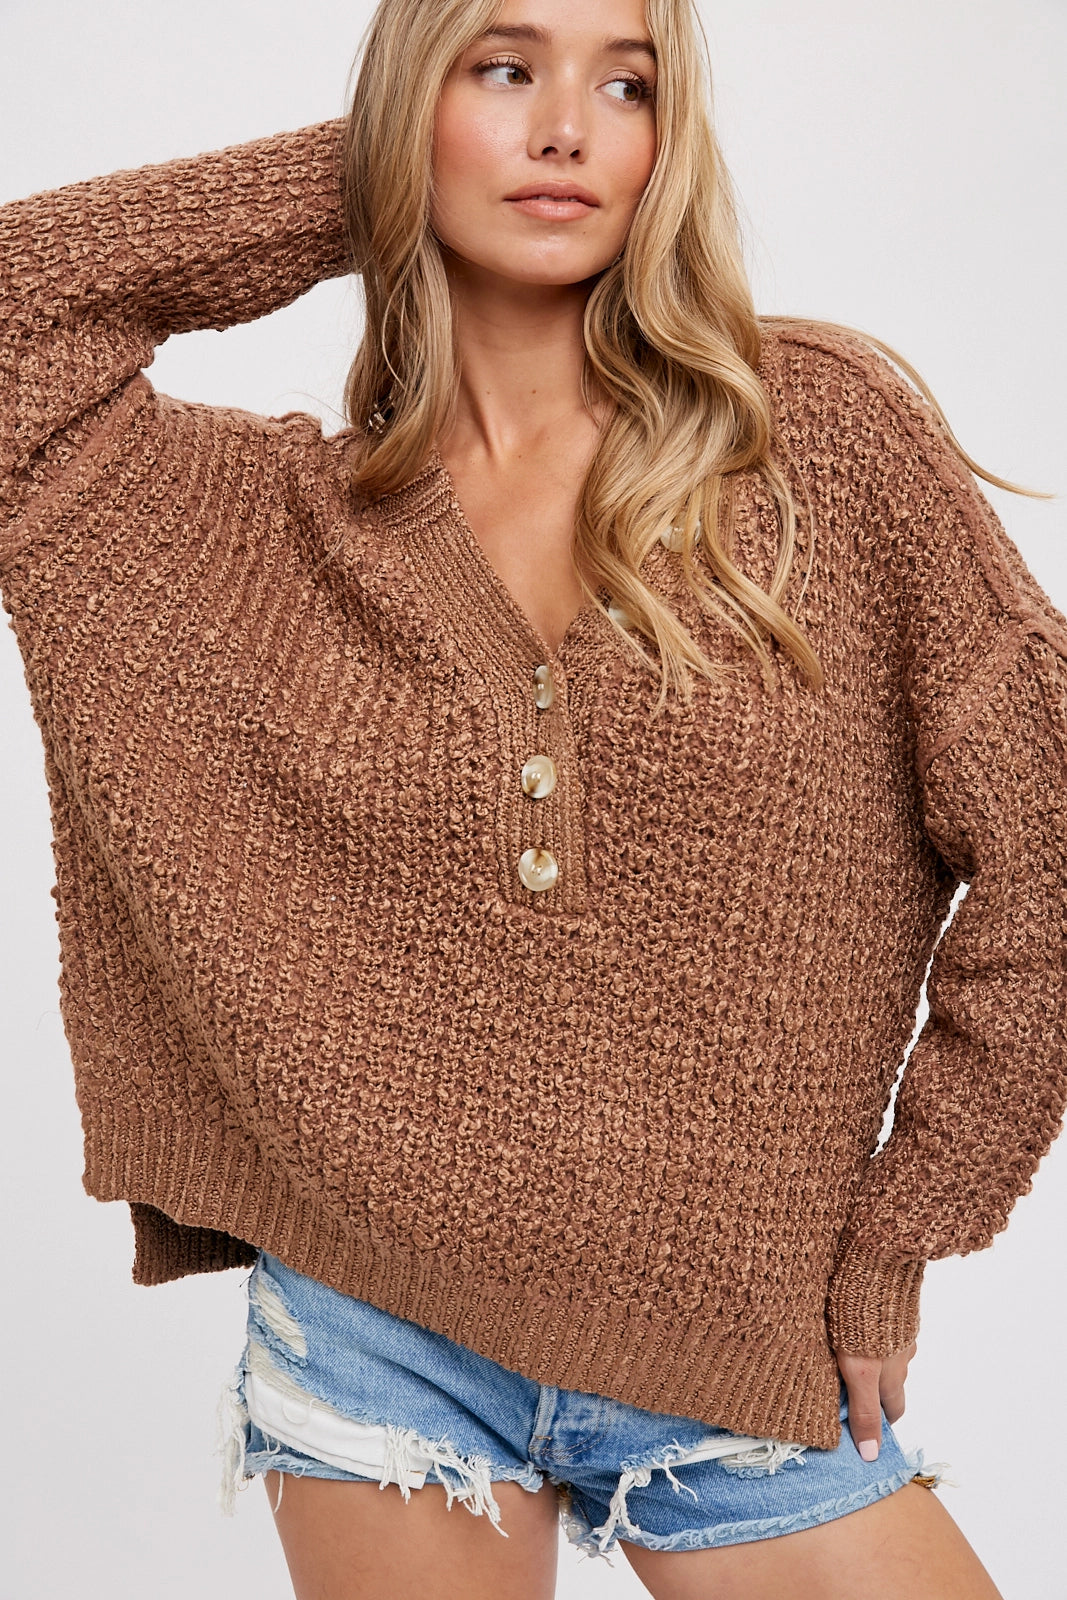 Thermal Henley Sweater Top